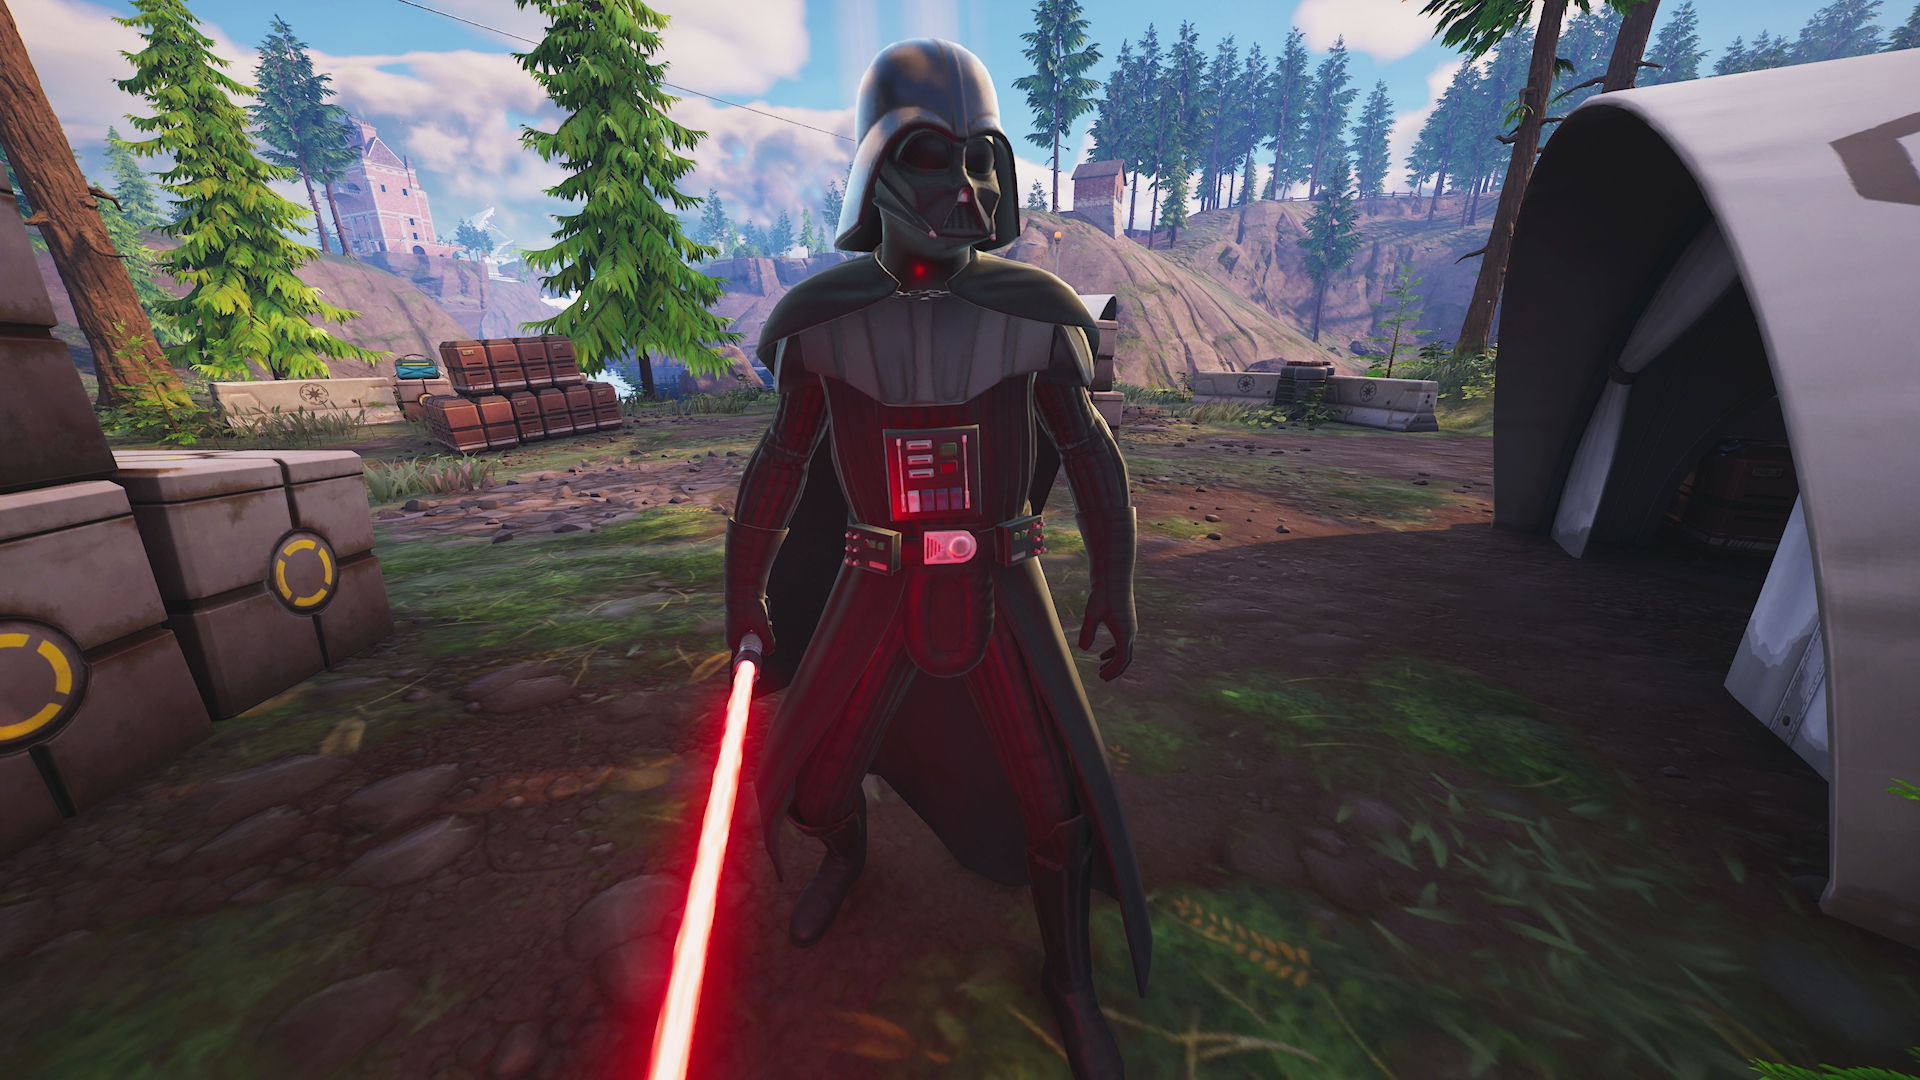 where to find darth vader and chewbacca in fortnite’s star wars update